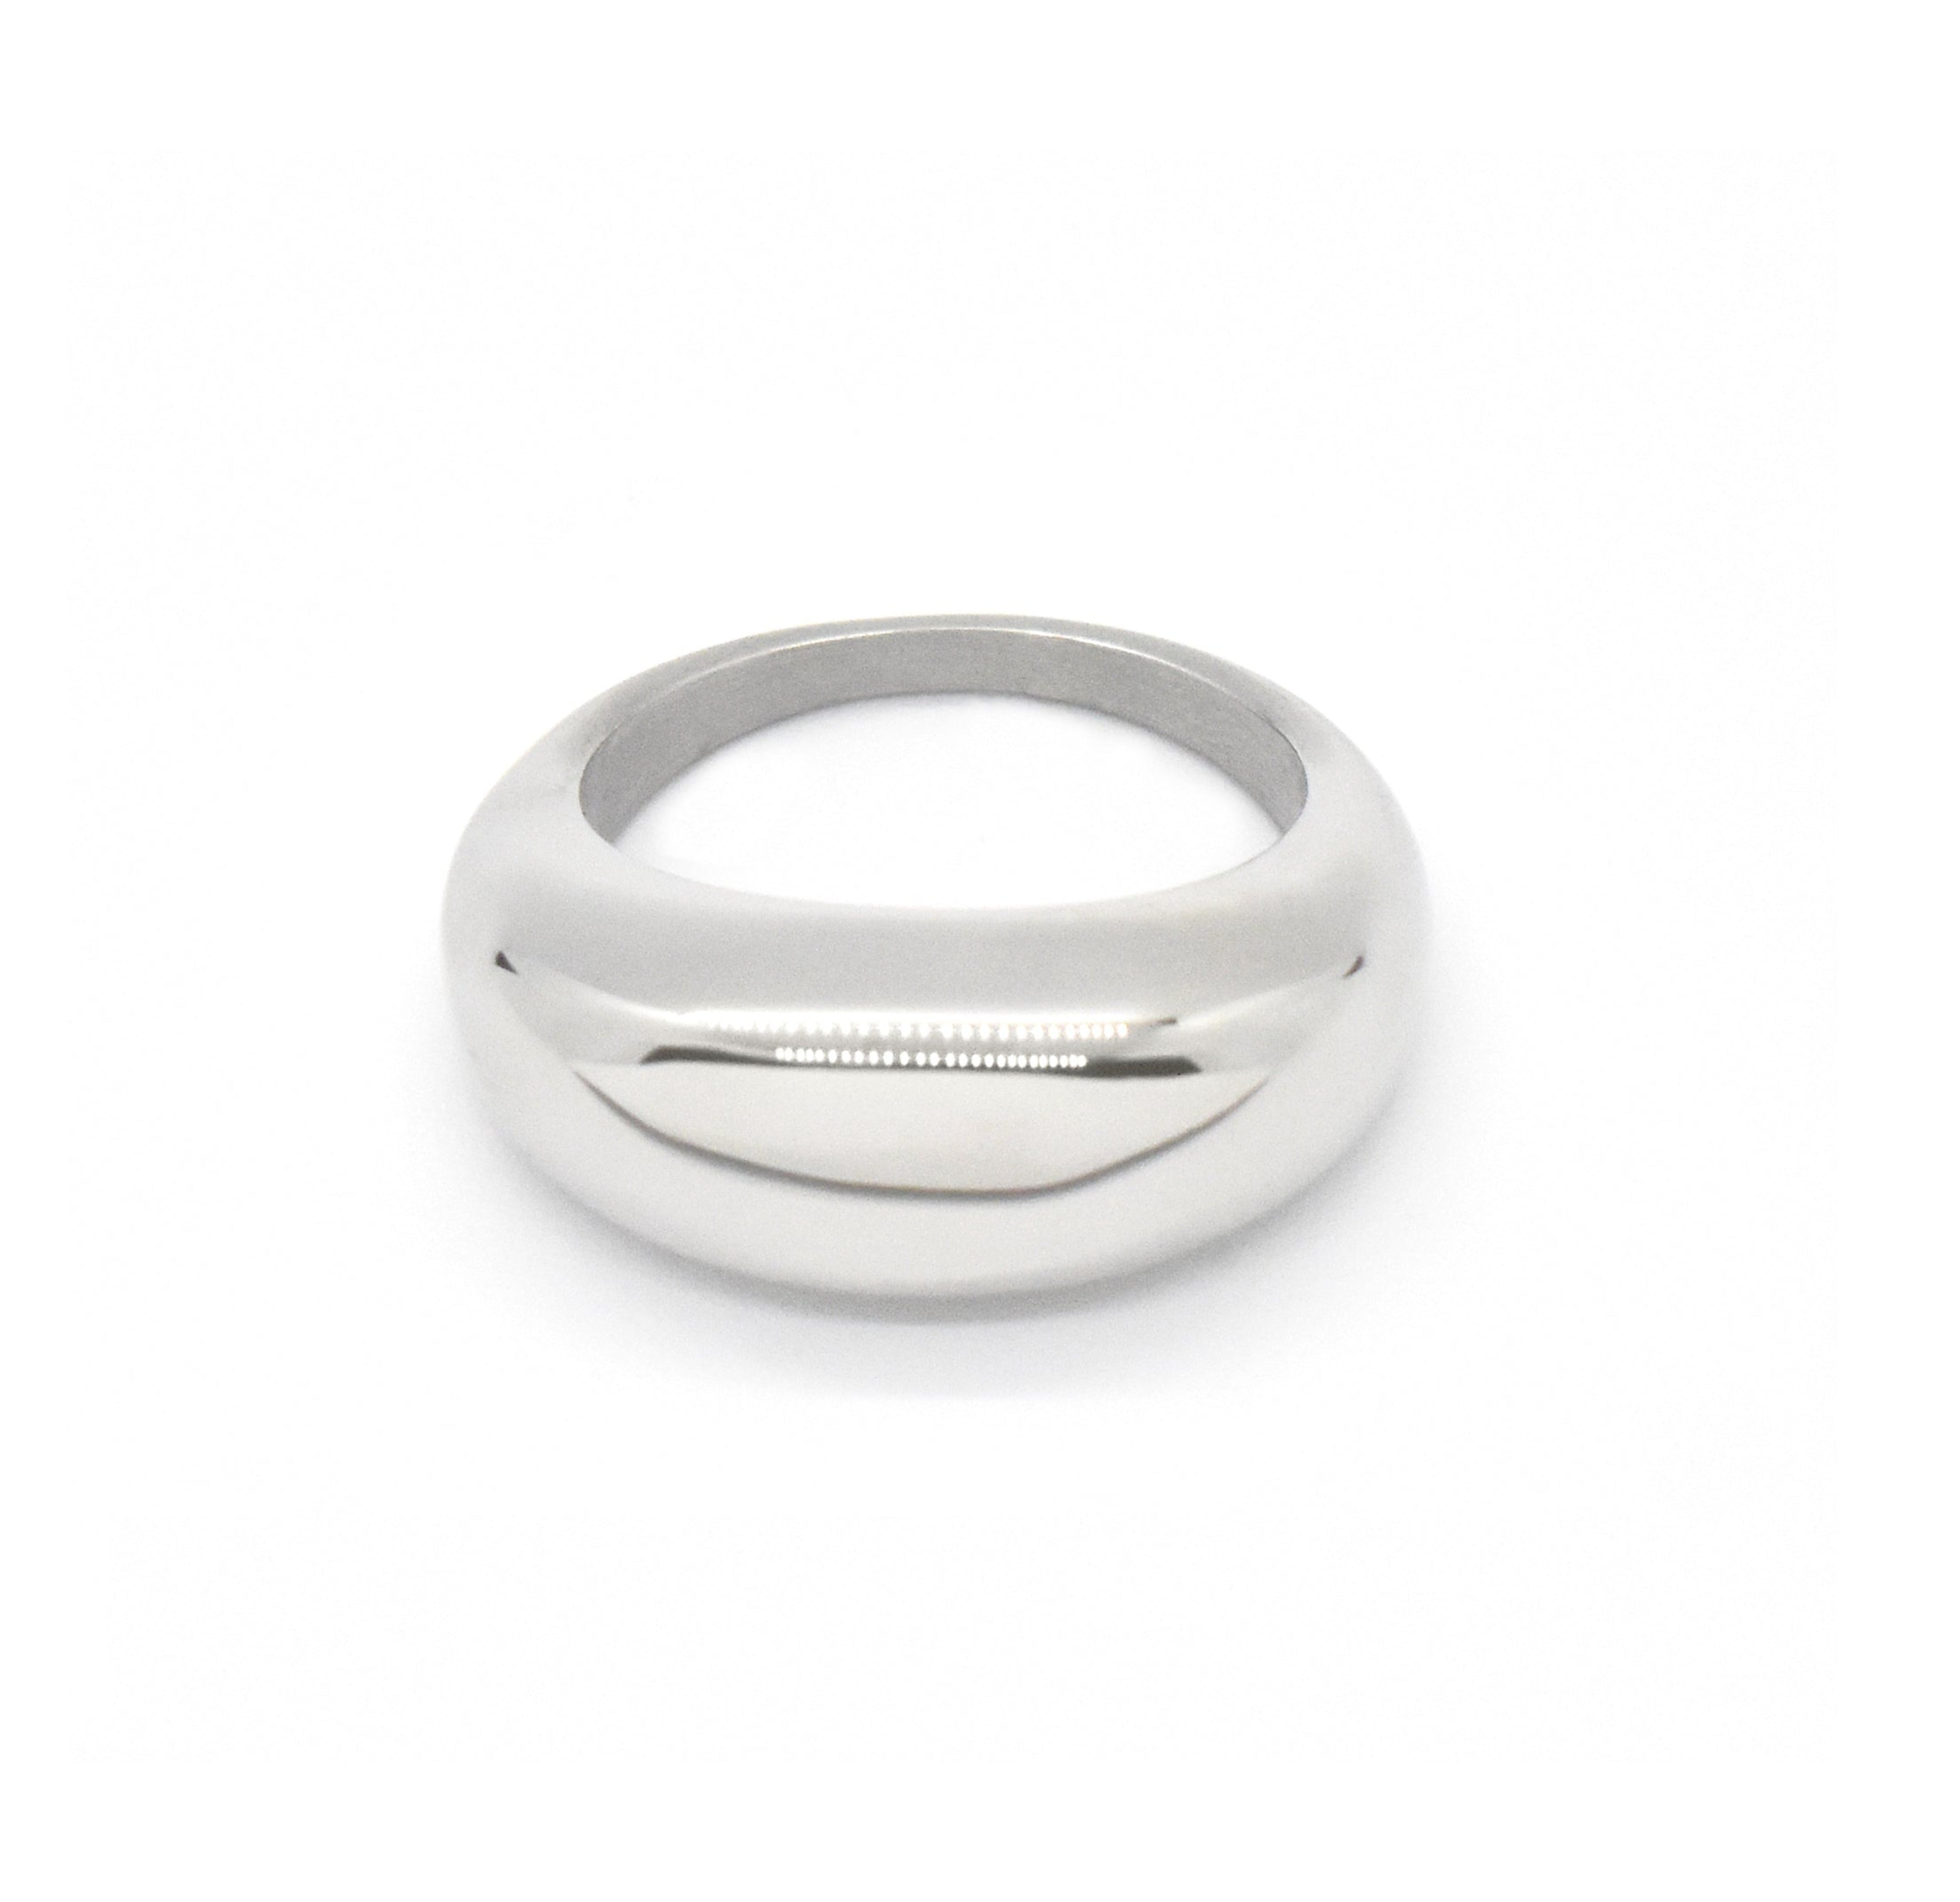 SILVER DOME RING WATERPROOF JEWELRY